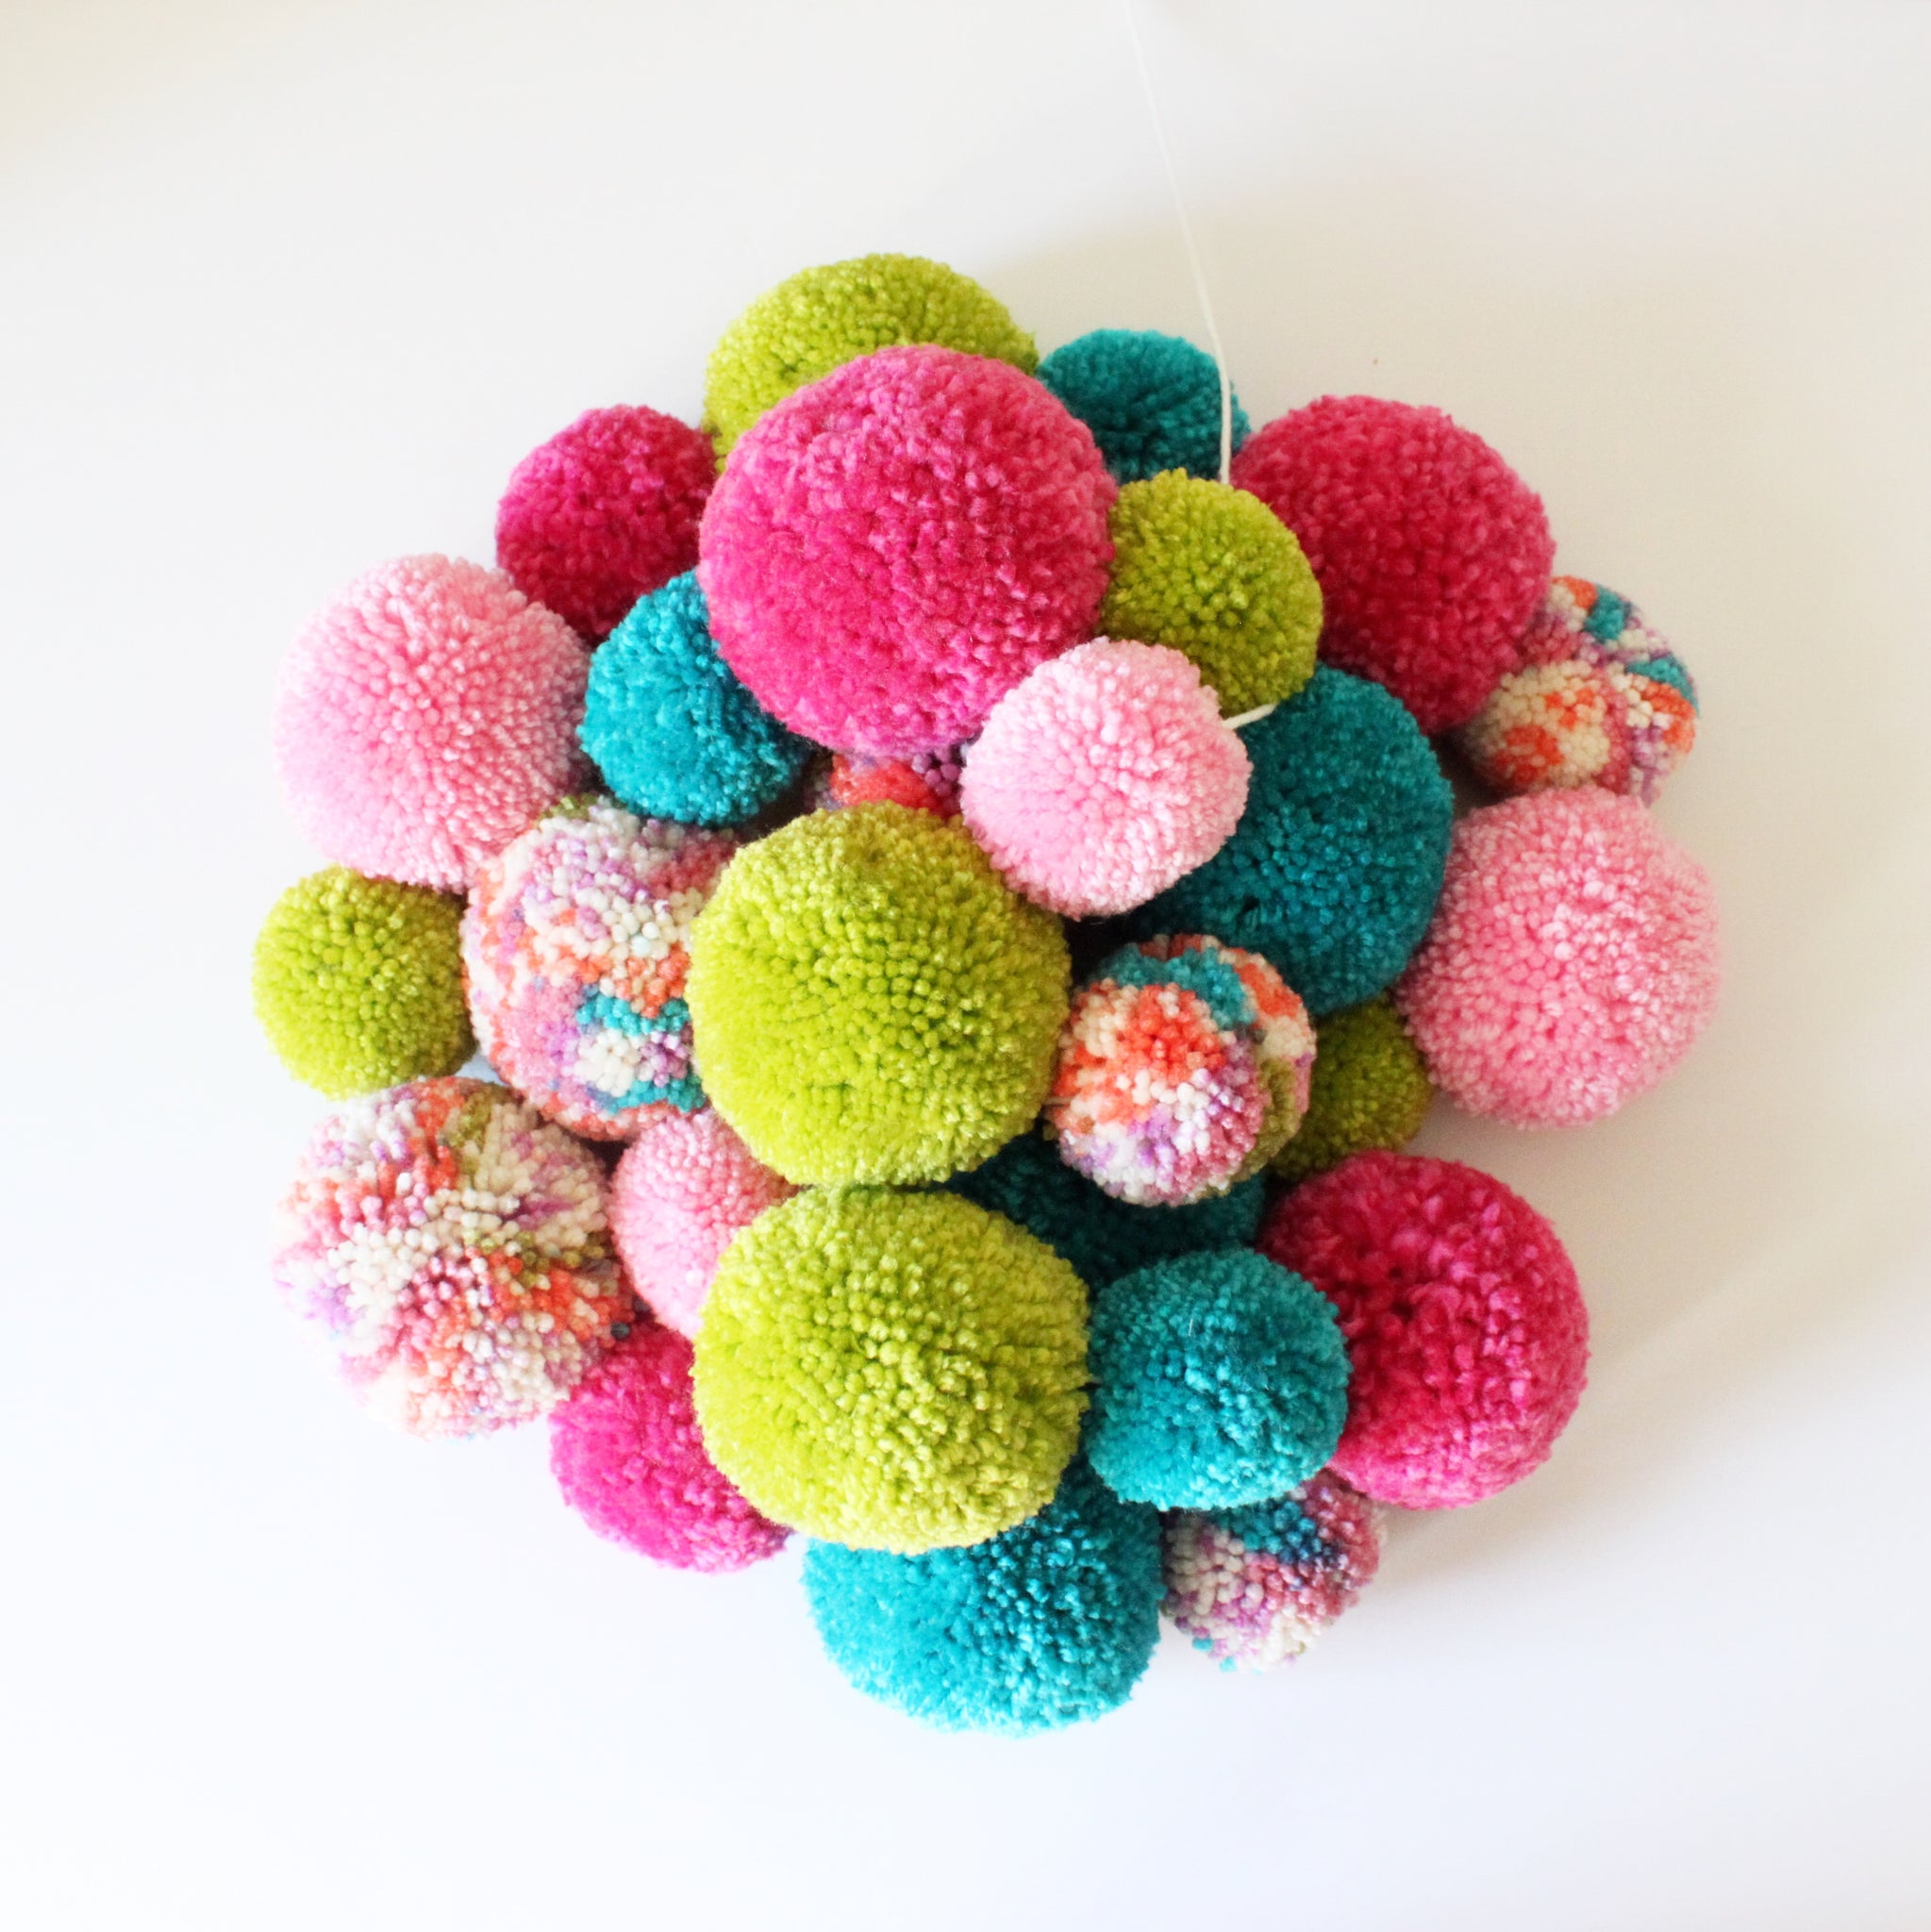 Pom Pom Garland, Yarn Pinks Teal Green Colors, Kids Party Decor and Room Decor